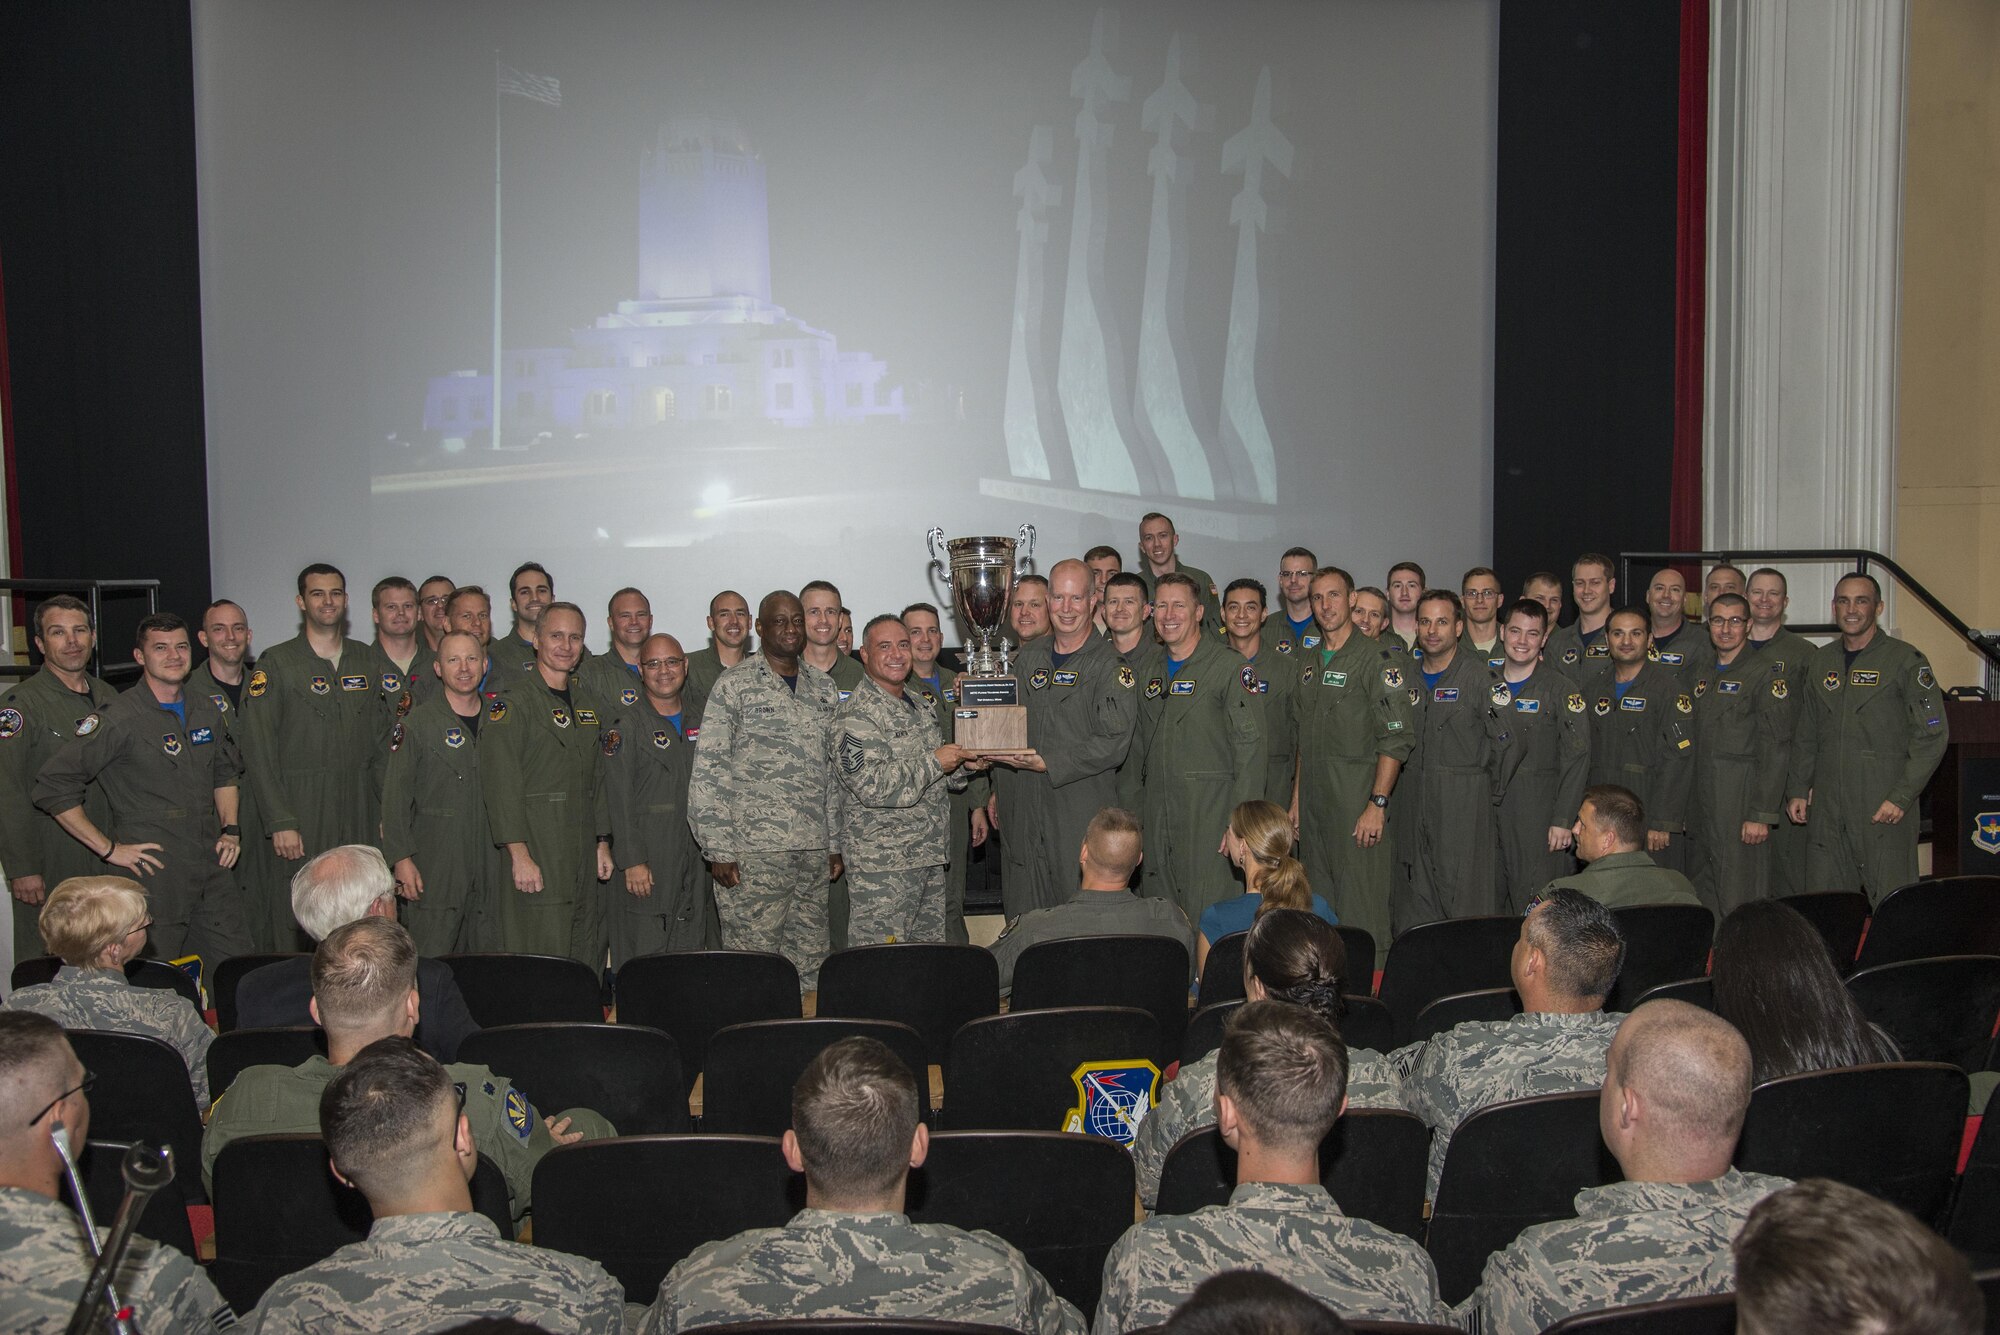 Members of the 12th Flying Training Wing pose with senior leadership after winning the "Wing of Wings" award during the inaugural flying training awards ceremony Oct. 20, 2017 at Joint Base San Antonio-Randolph, Texas. The awards paid tribute to the individuals and teams who continue to produce highly qualified aircrew for the United States Air Force. (U.S. Air Force photo by Senior Airman Stormy Archer)